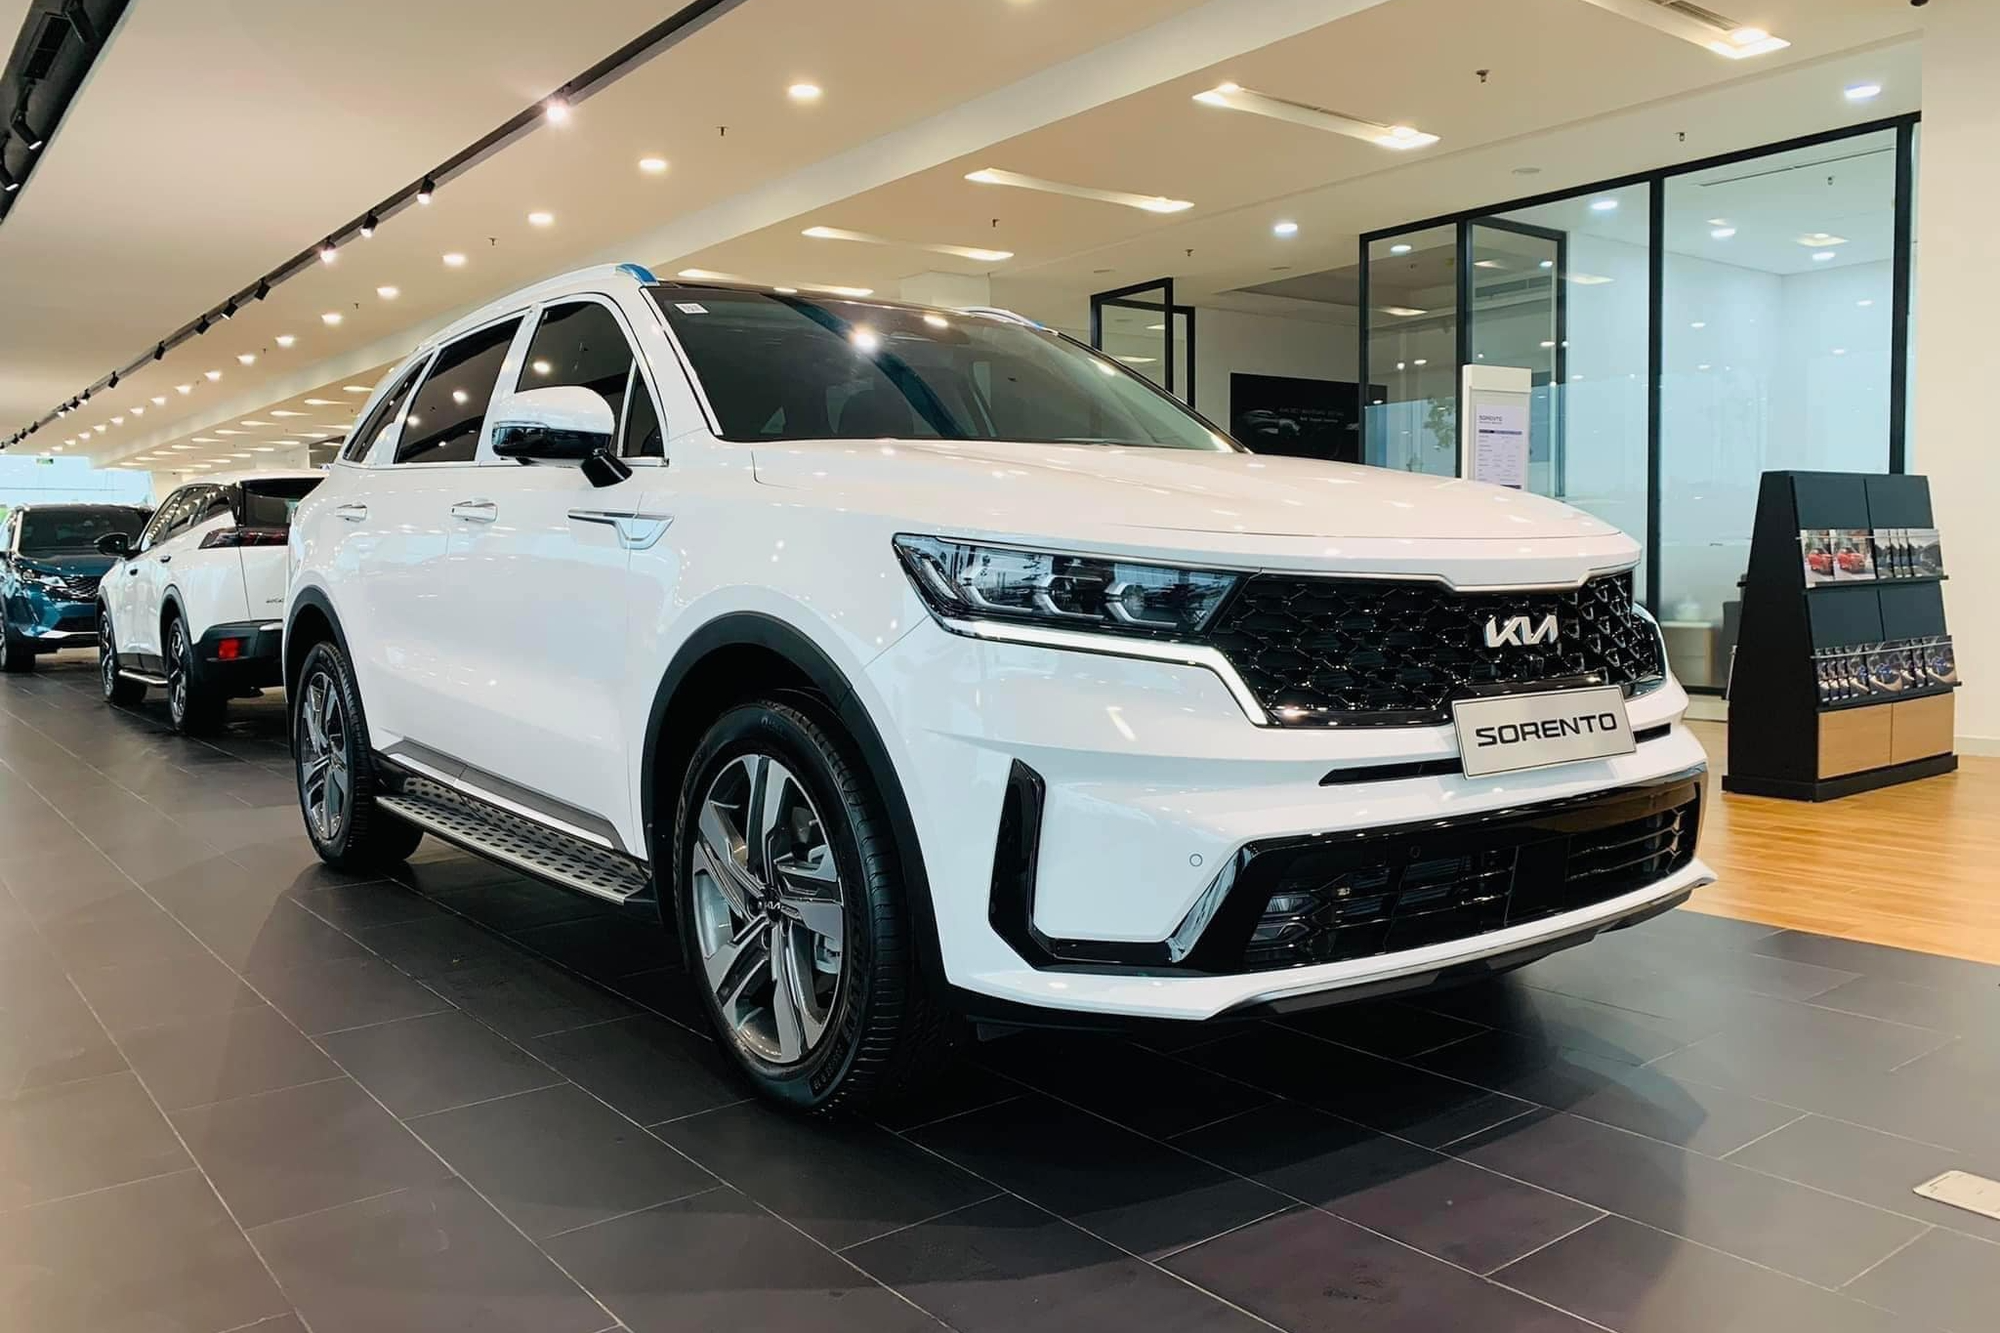 The standard price of this SUV model has dropped from 1,069 billion VND to only 999 million VND, which is lower than the rival Hyundai Santa Fe (from 1,055 billion VND) - Photo: Kia Dealer/Facebook